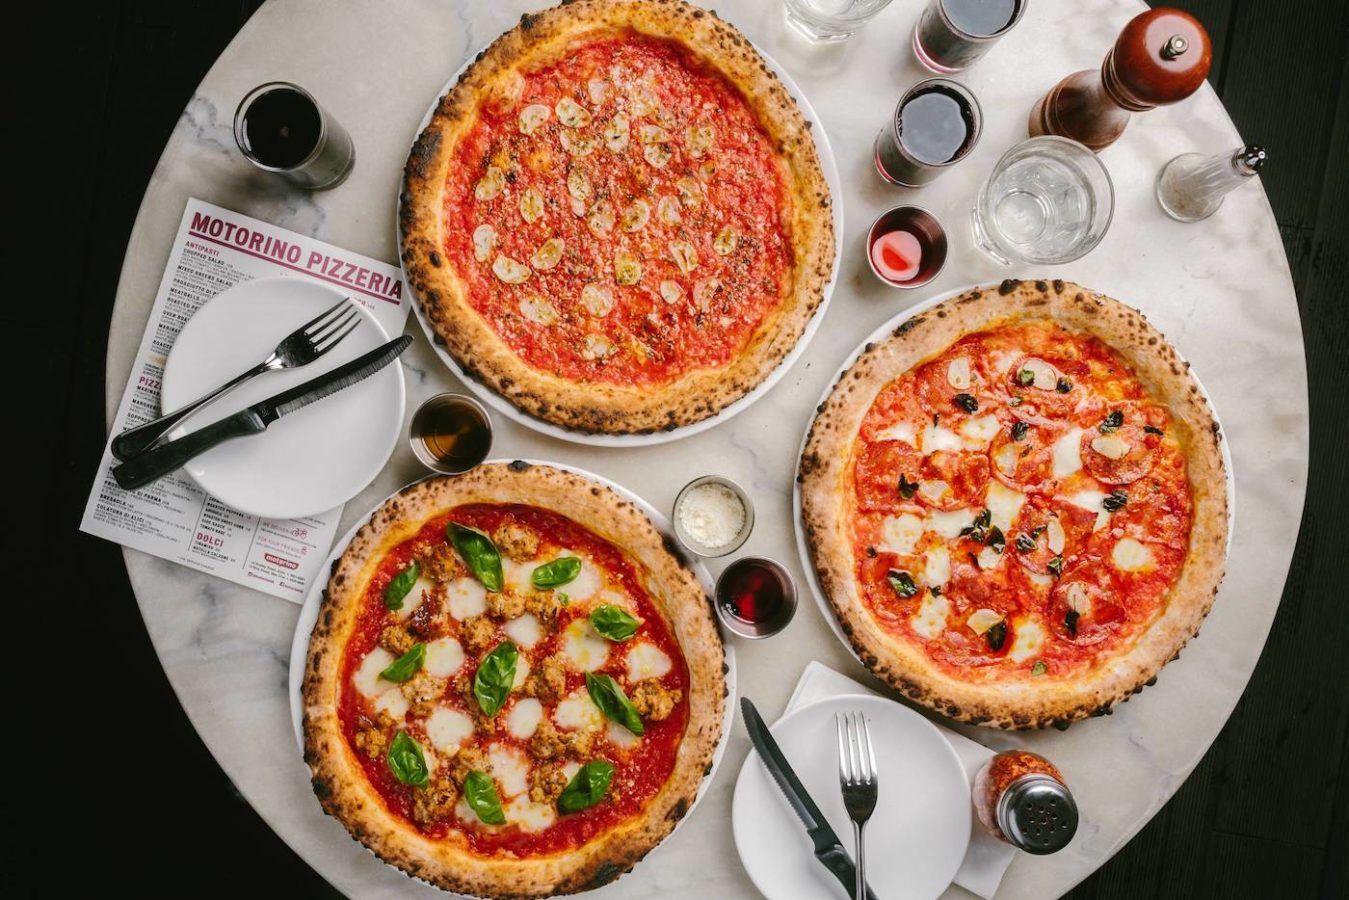 An Italian’s Guide to The Best Pizza in Hong Kong